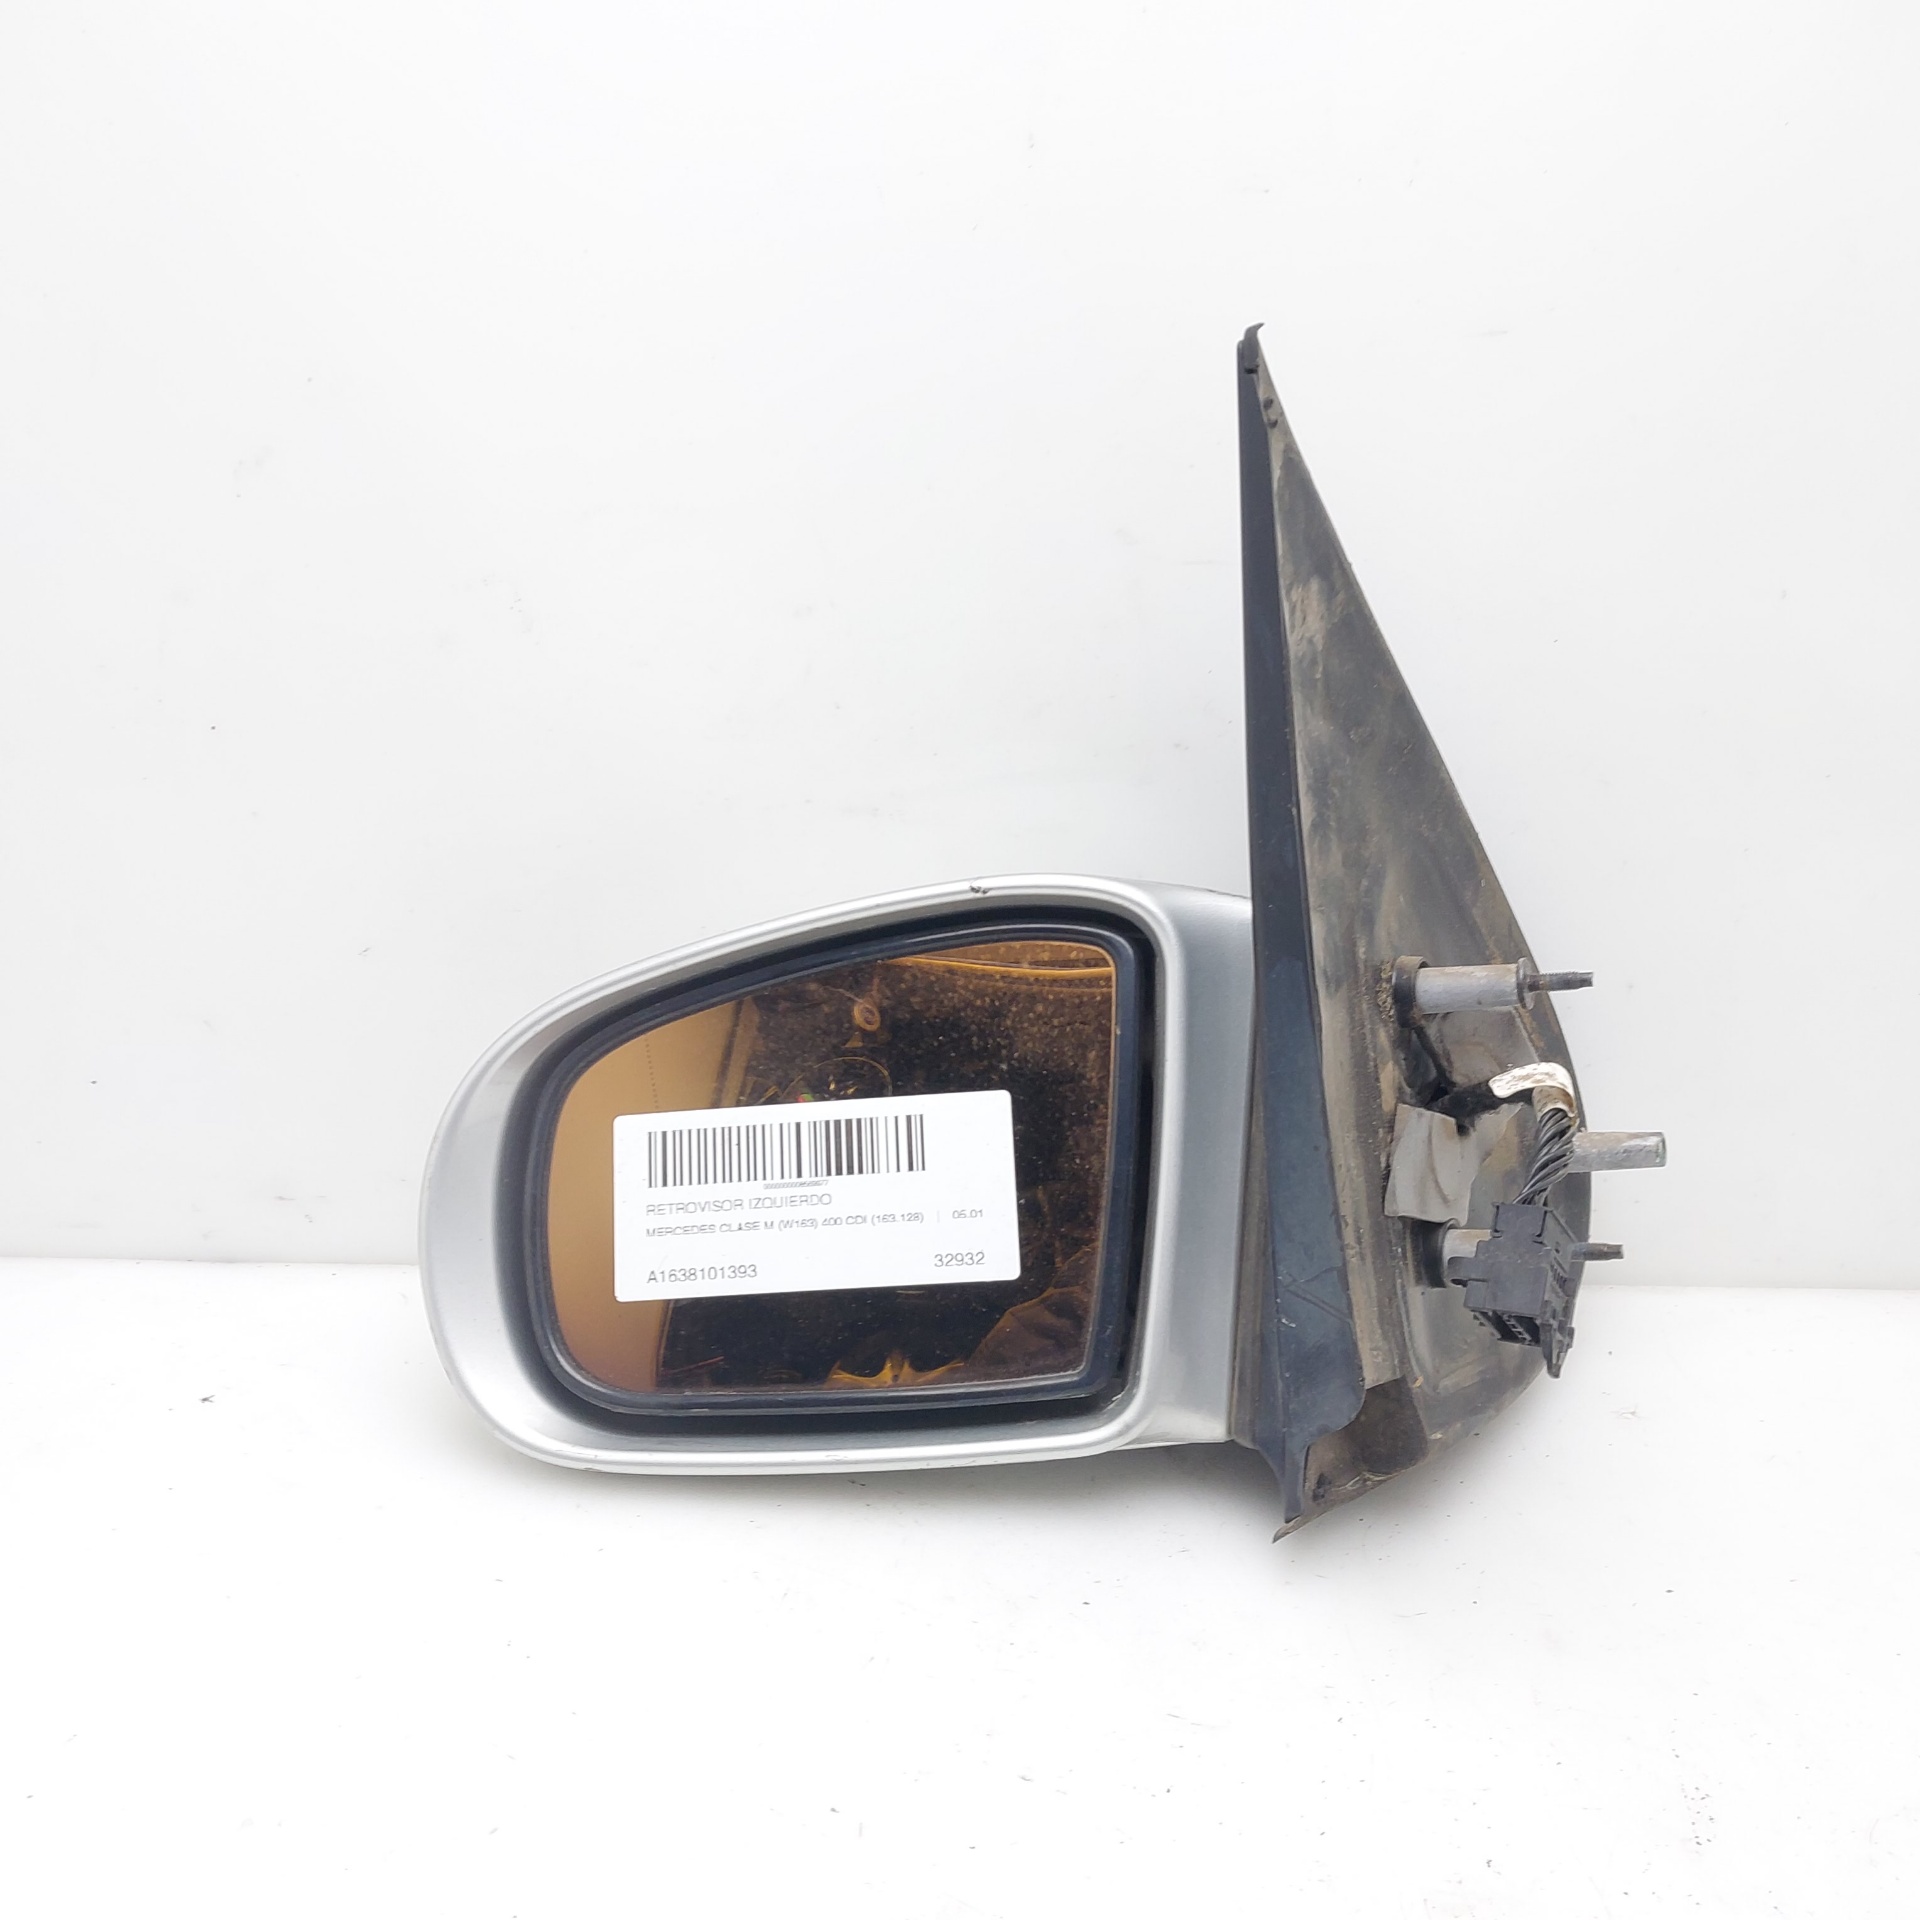 MERCEDES-BENZ M-Class W163 (1997-2005) Left Side Wing Mirror A1638101393 25017881